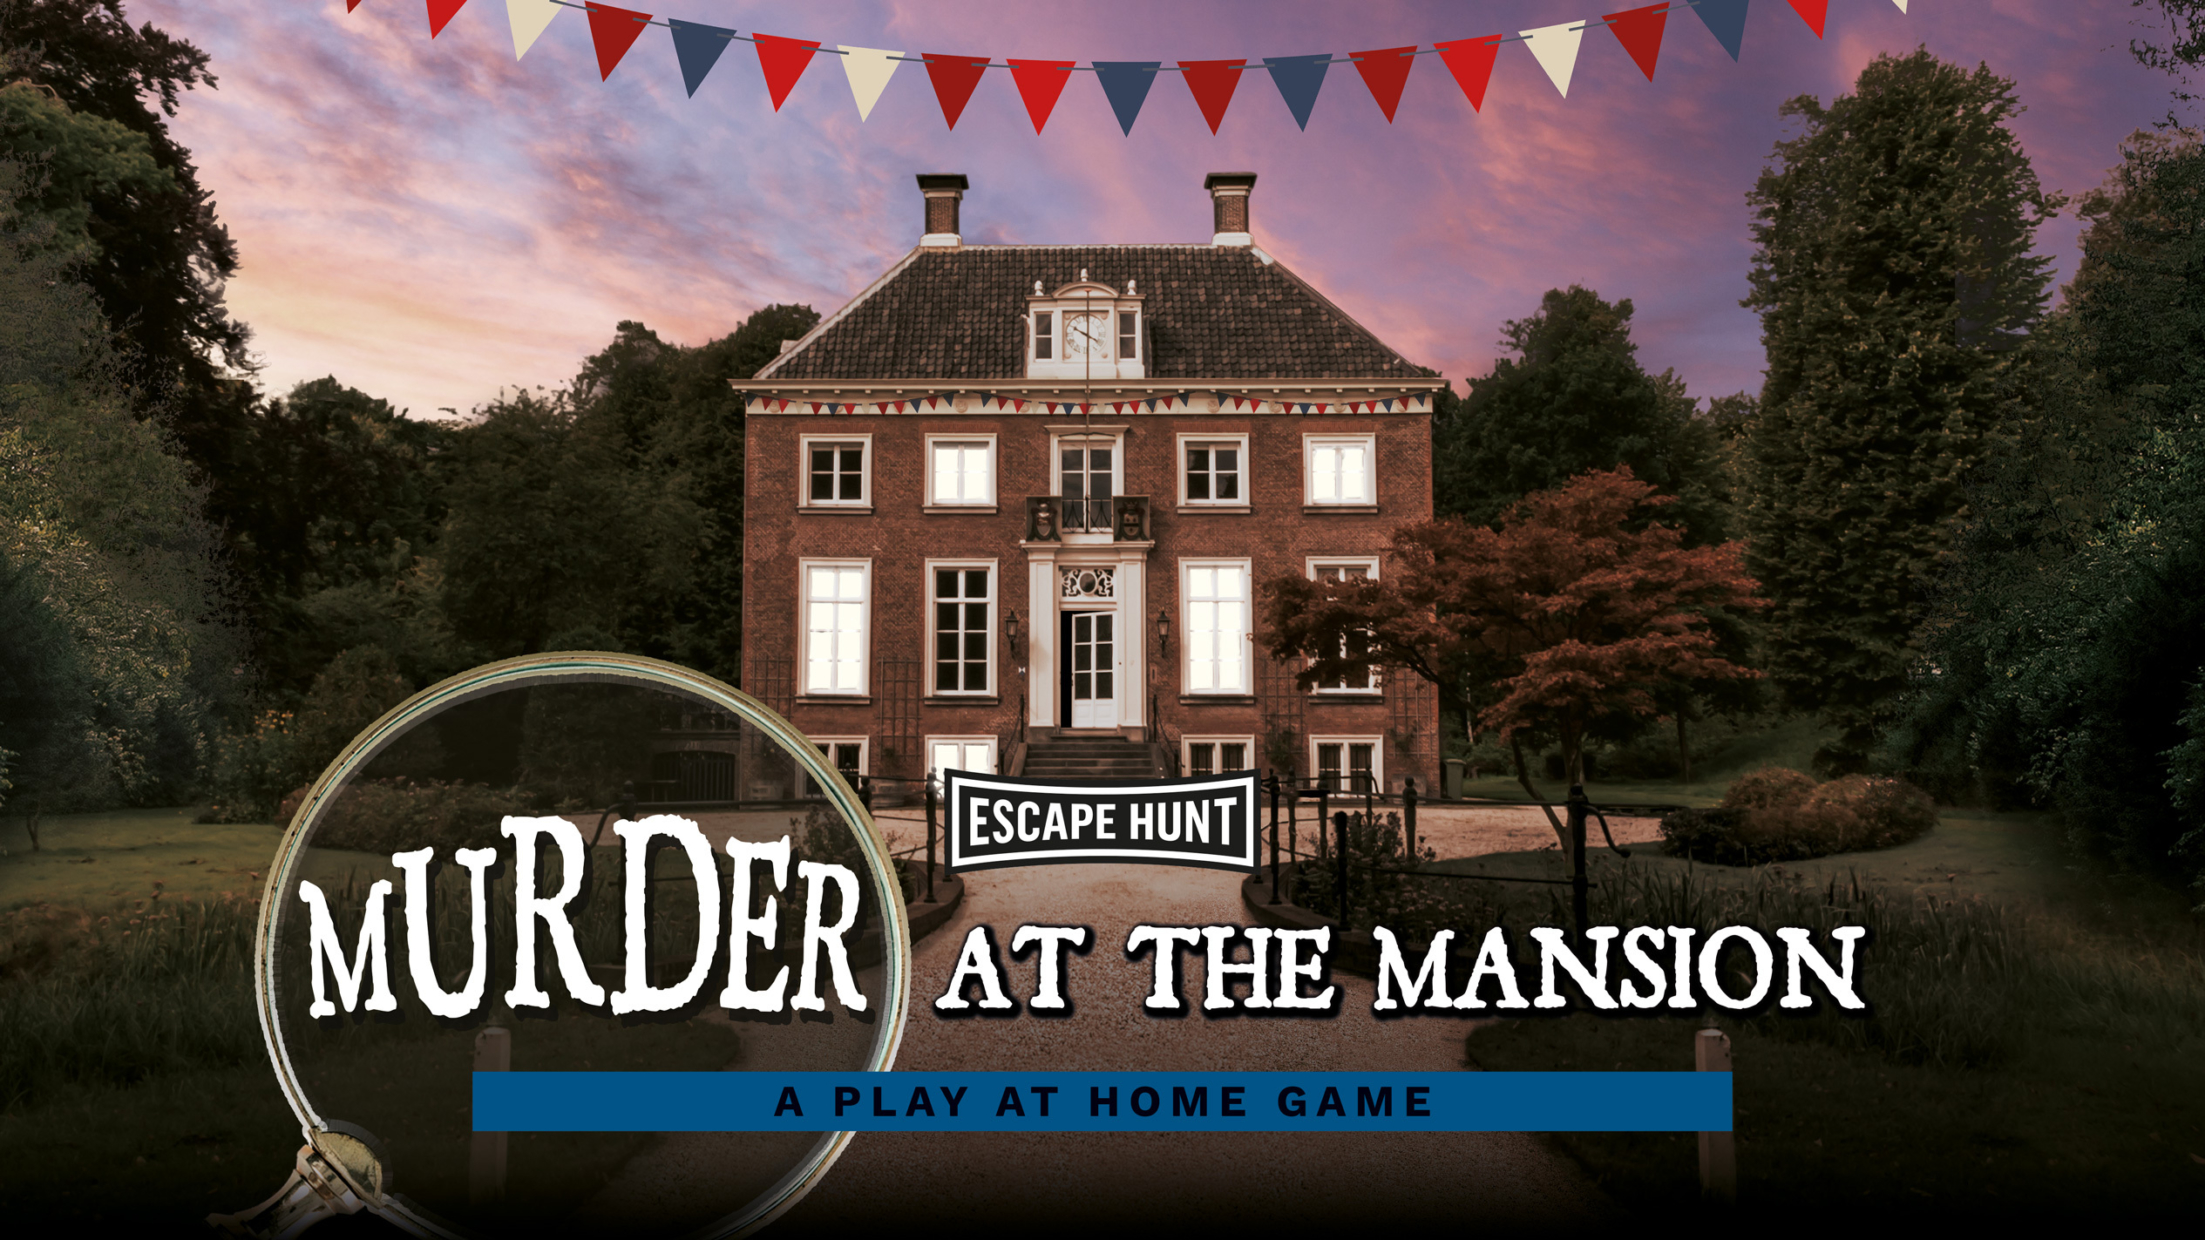 MURDER AT THE MANSION – NEW PLAY AT HOME ESCAPE GAME “PRINT & PLAY”!